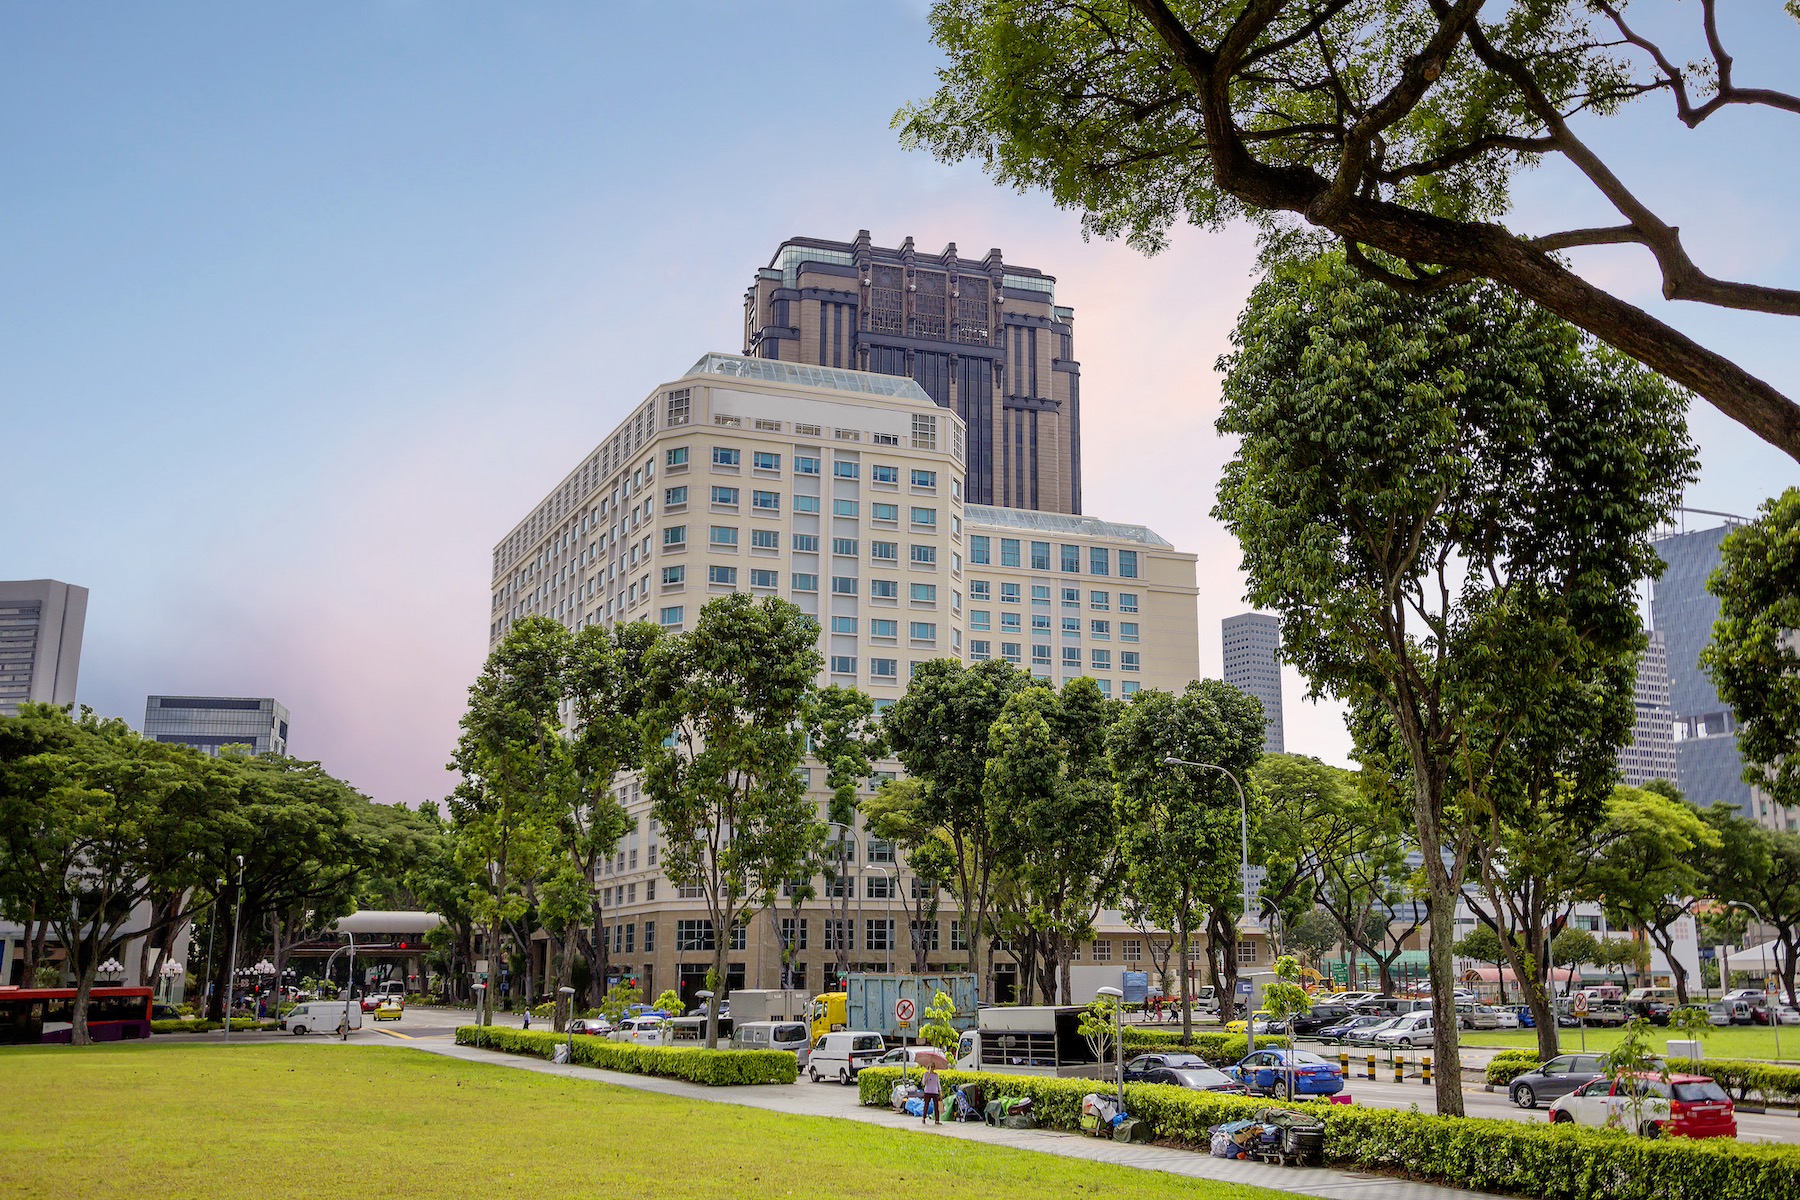 Raffles Hospital stands against the Singapore skyline, behind a row of trees